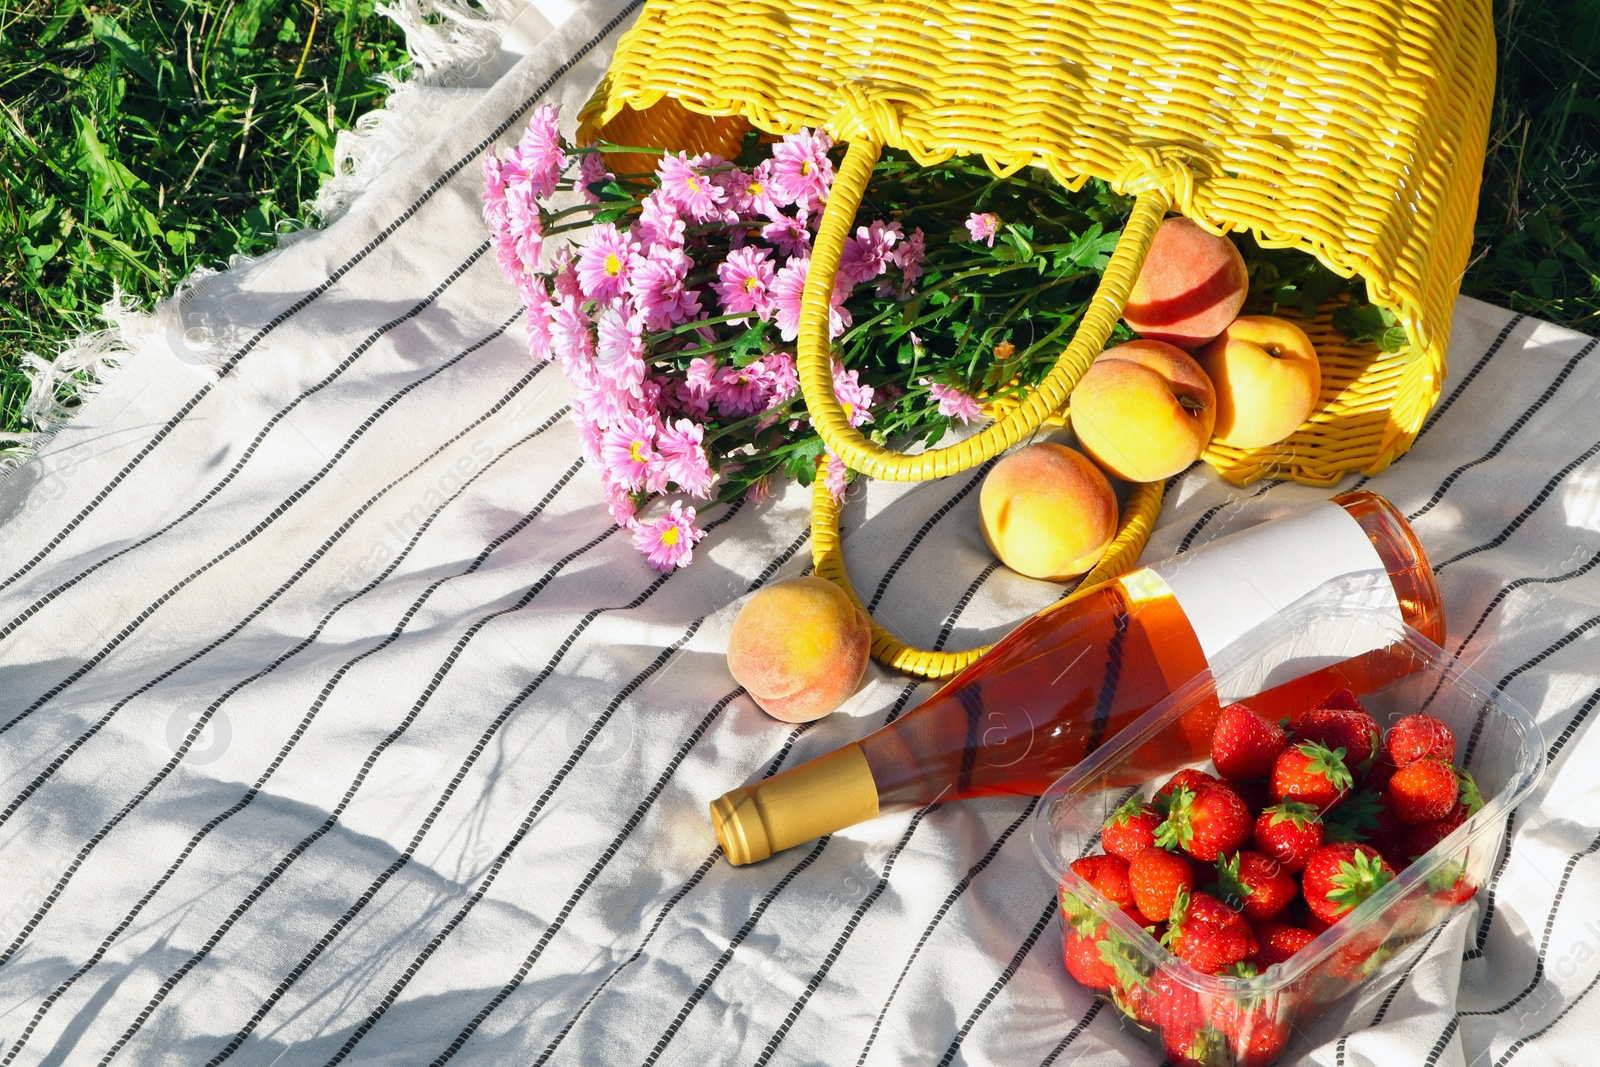 Photo of Yellow wicker bag with beautiful flowers, bottle of wine and food on picnic blanket outdoors